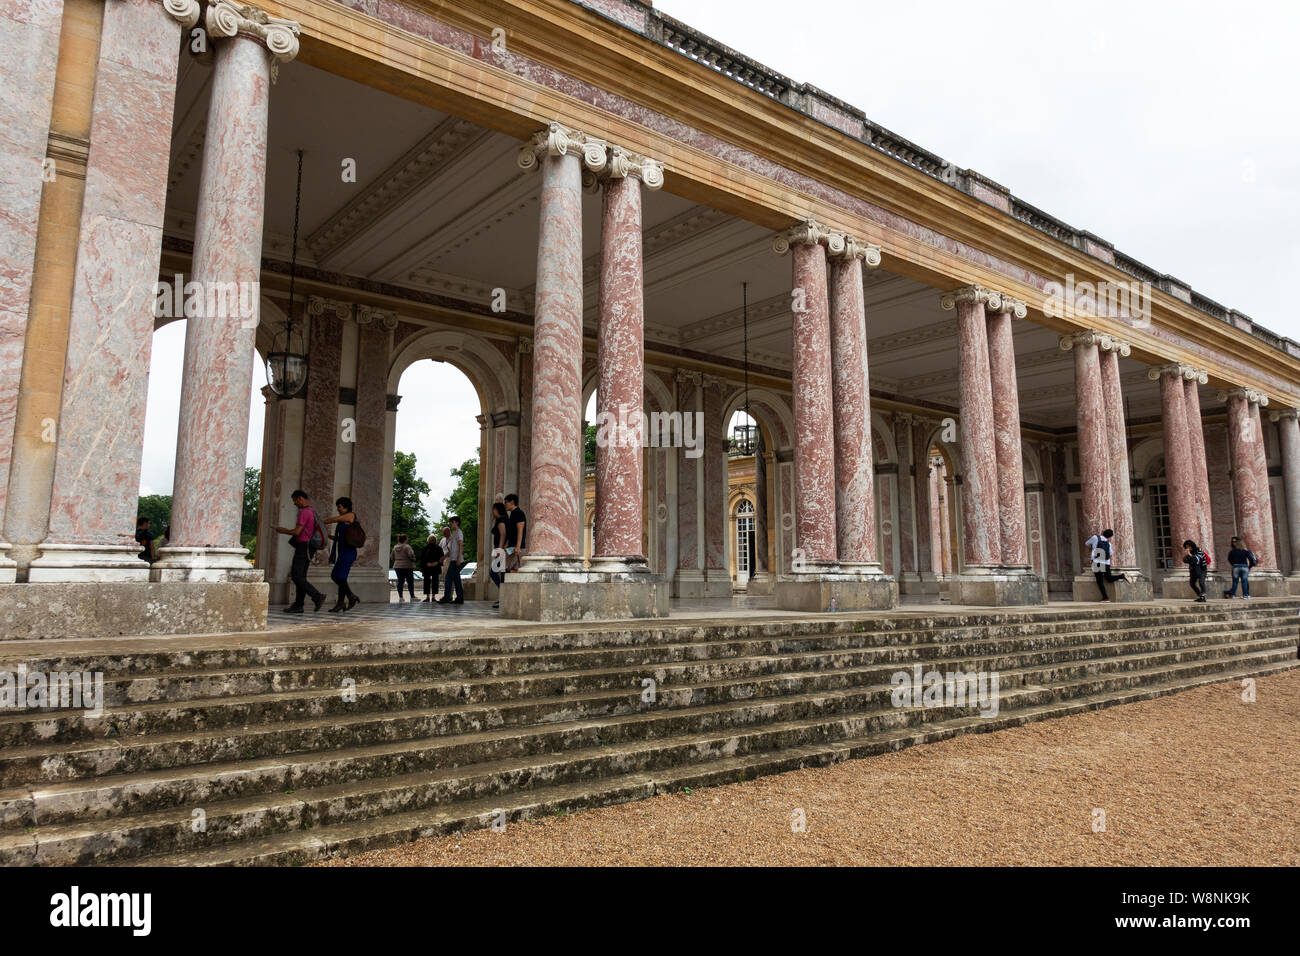 Colonnade of The Grand Trianon Palace - Palace of Versailles, Yvelines, Île-de-France region of France Stock Photo